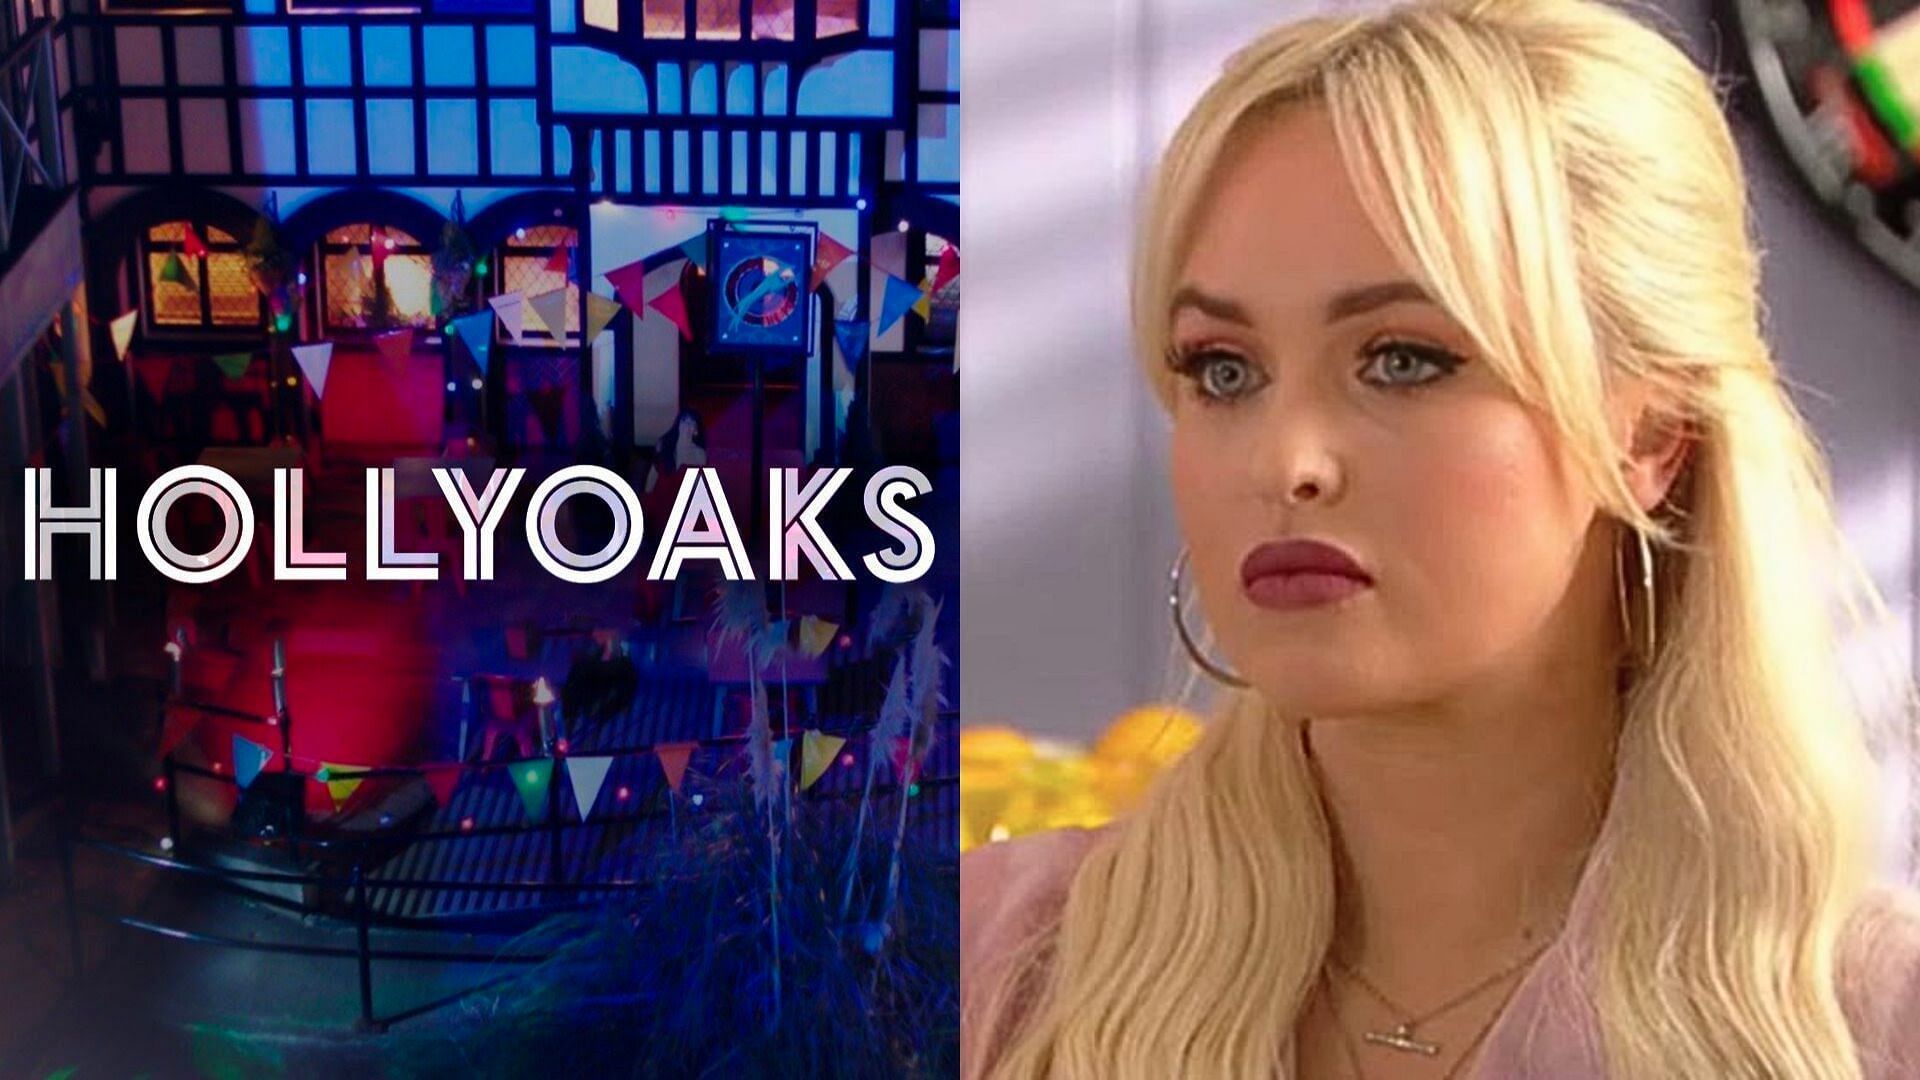 The drama on (L) Hollyoaks is being led by (R) Theresa this week (Images via IMDb)